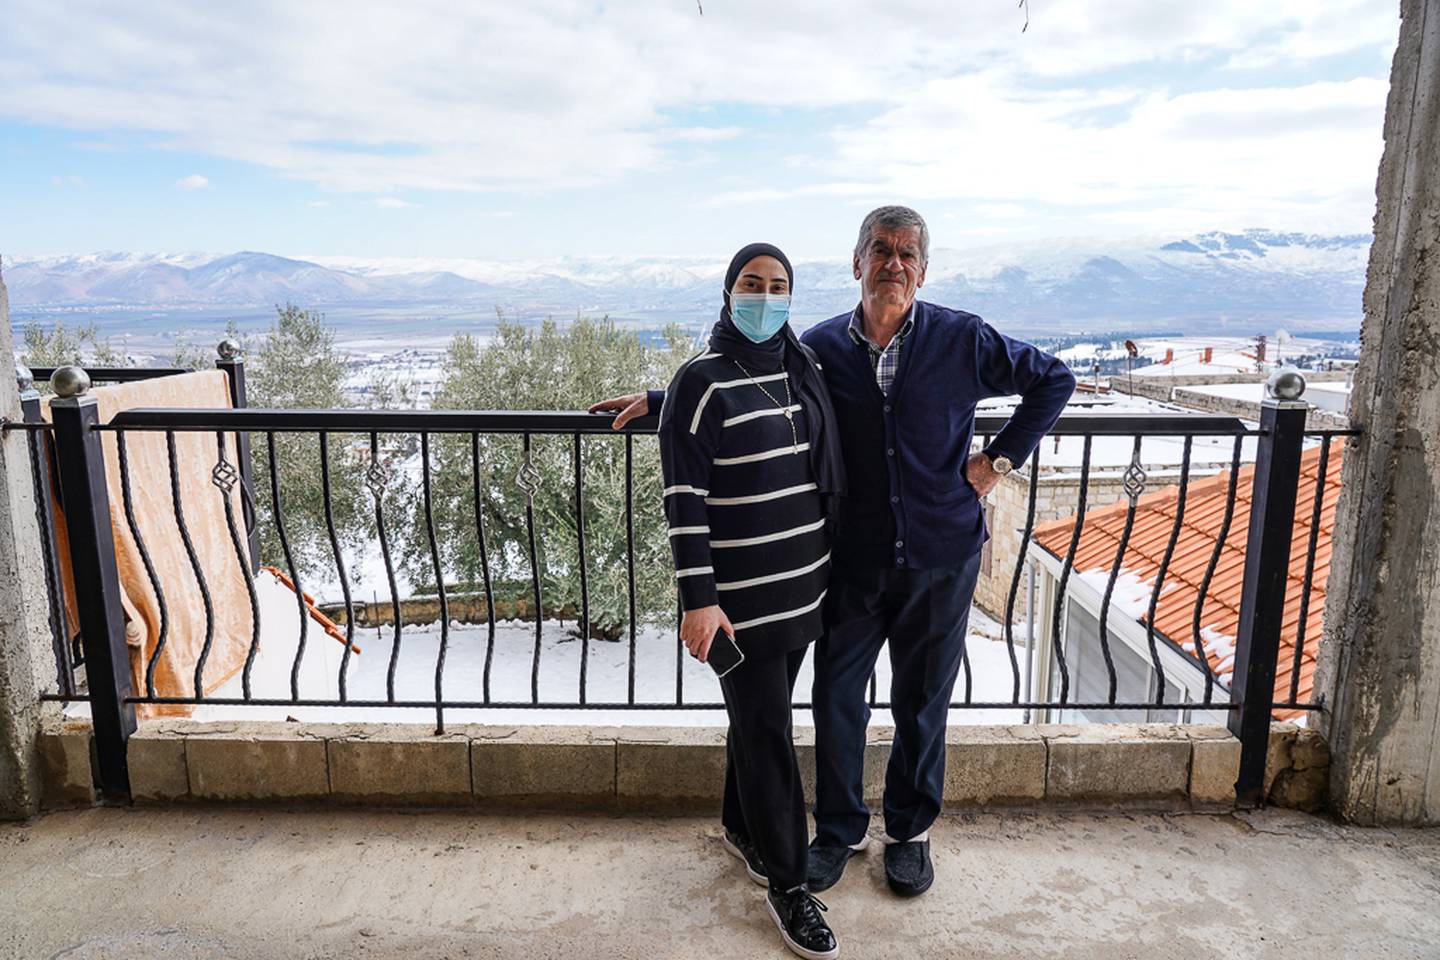 Abdallah Assaii's sister, Fatima, and her father, Ali, stand on the balcony of their home in the town of Kefraya, in Lebanon's Bekaa Valley.